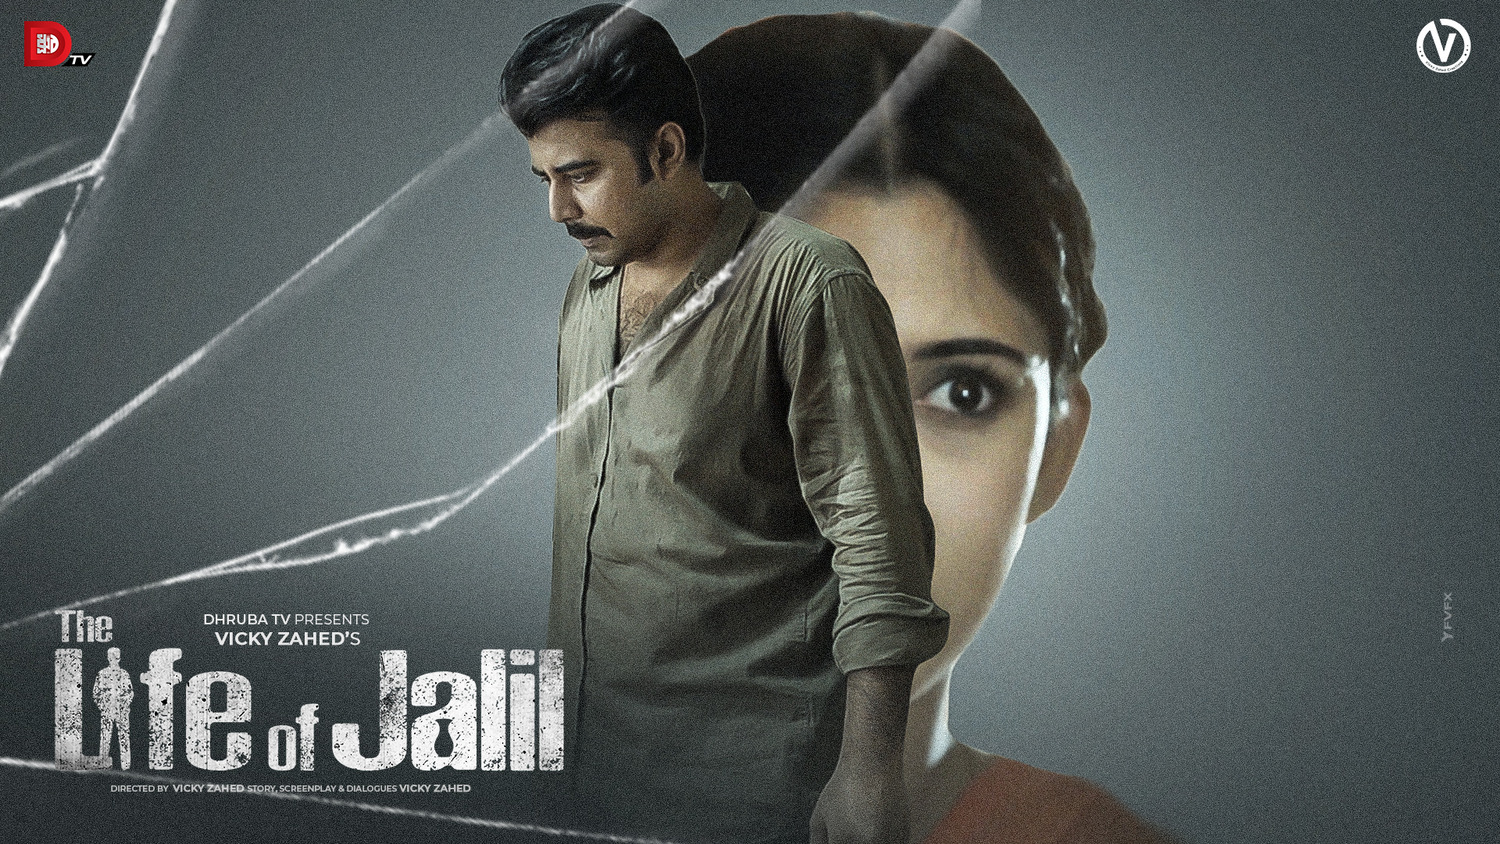 Extra Large TV Poster Image for The Life of Jalil (#1 of 2)